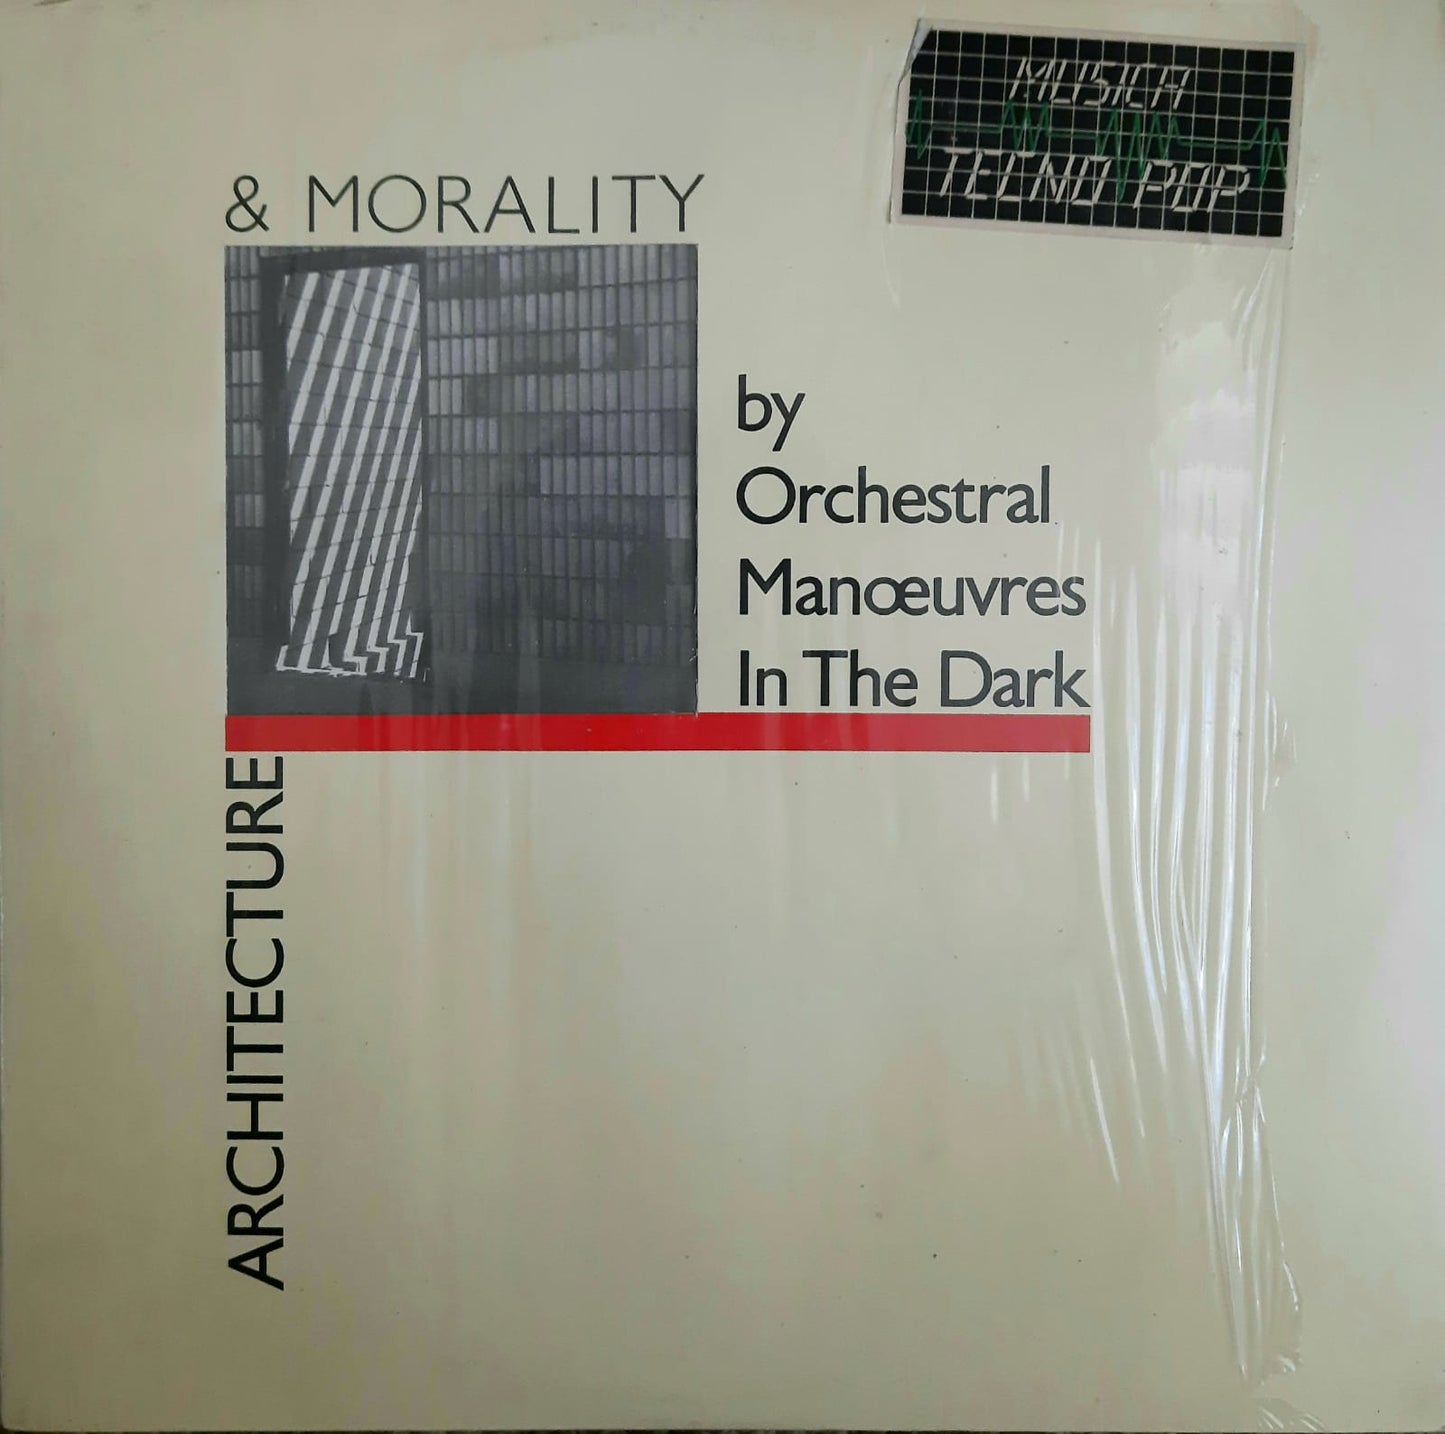 Orchestral Manœuvres In The Dark - Architecture & Morality (LP, España, 1981)